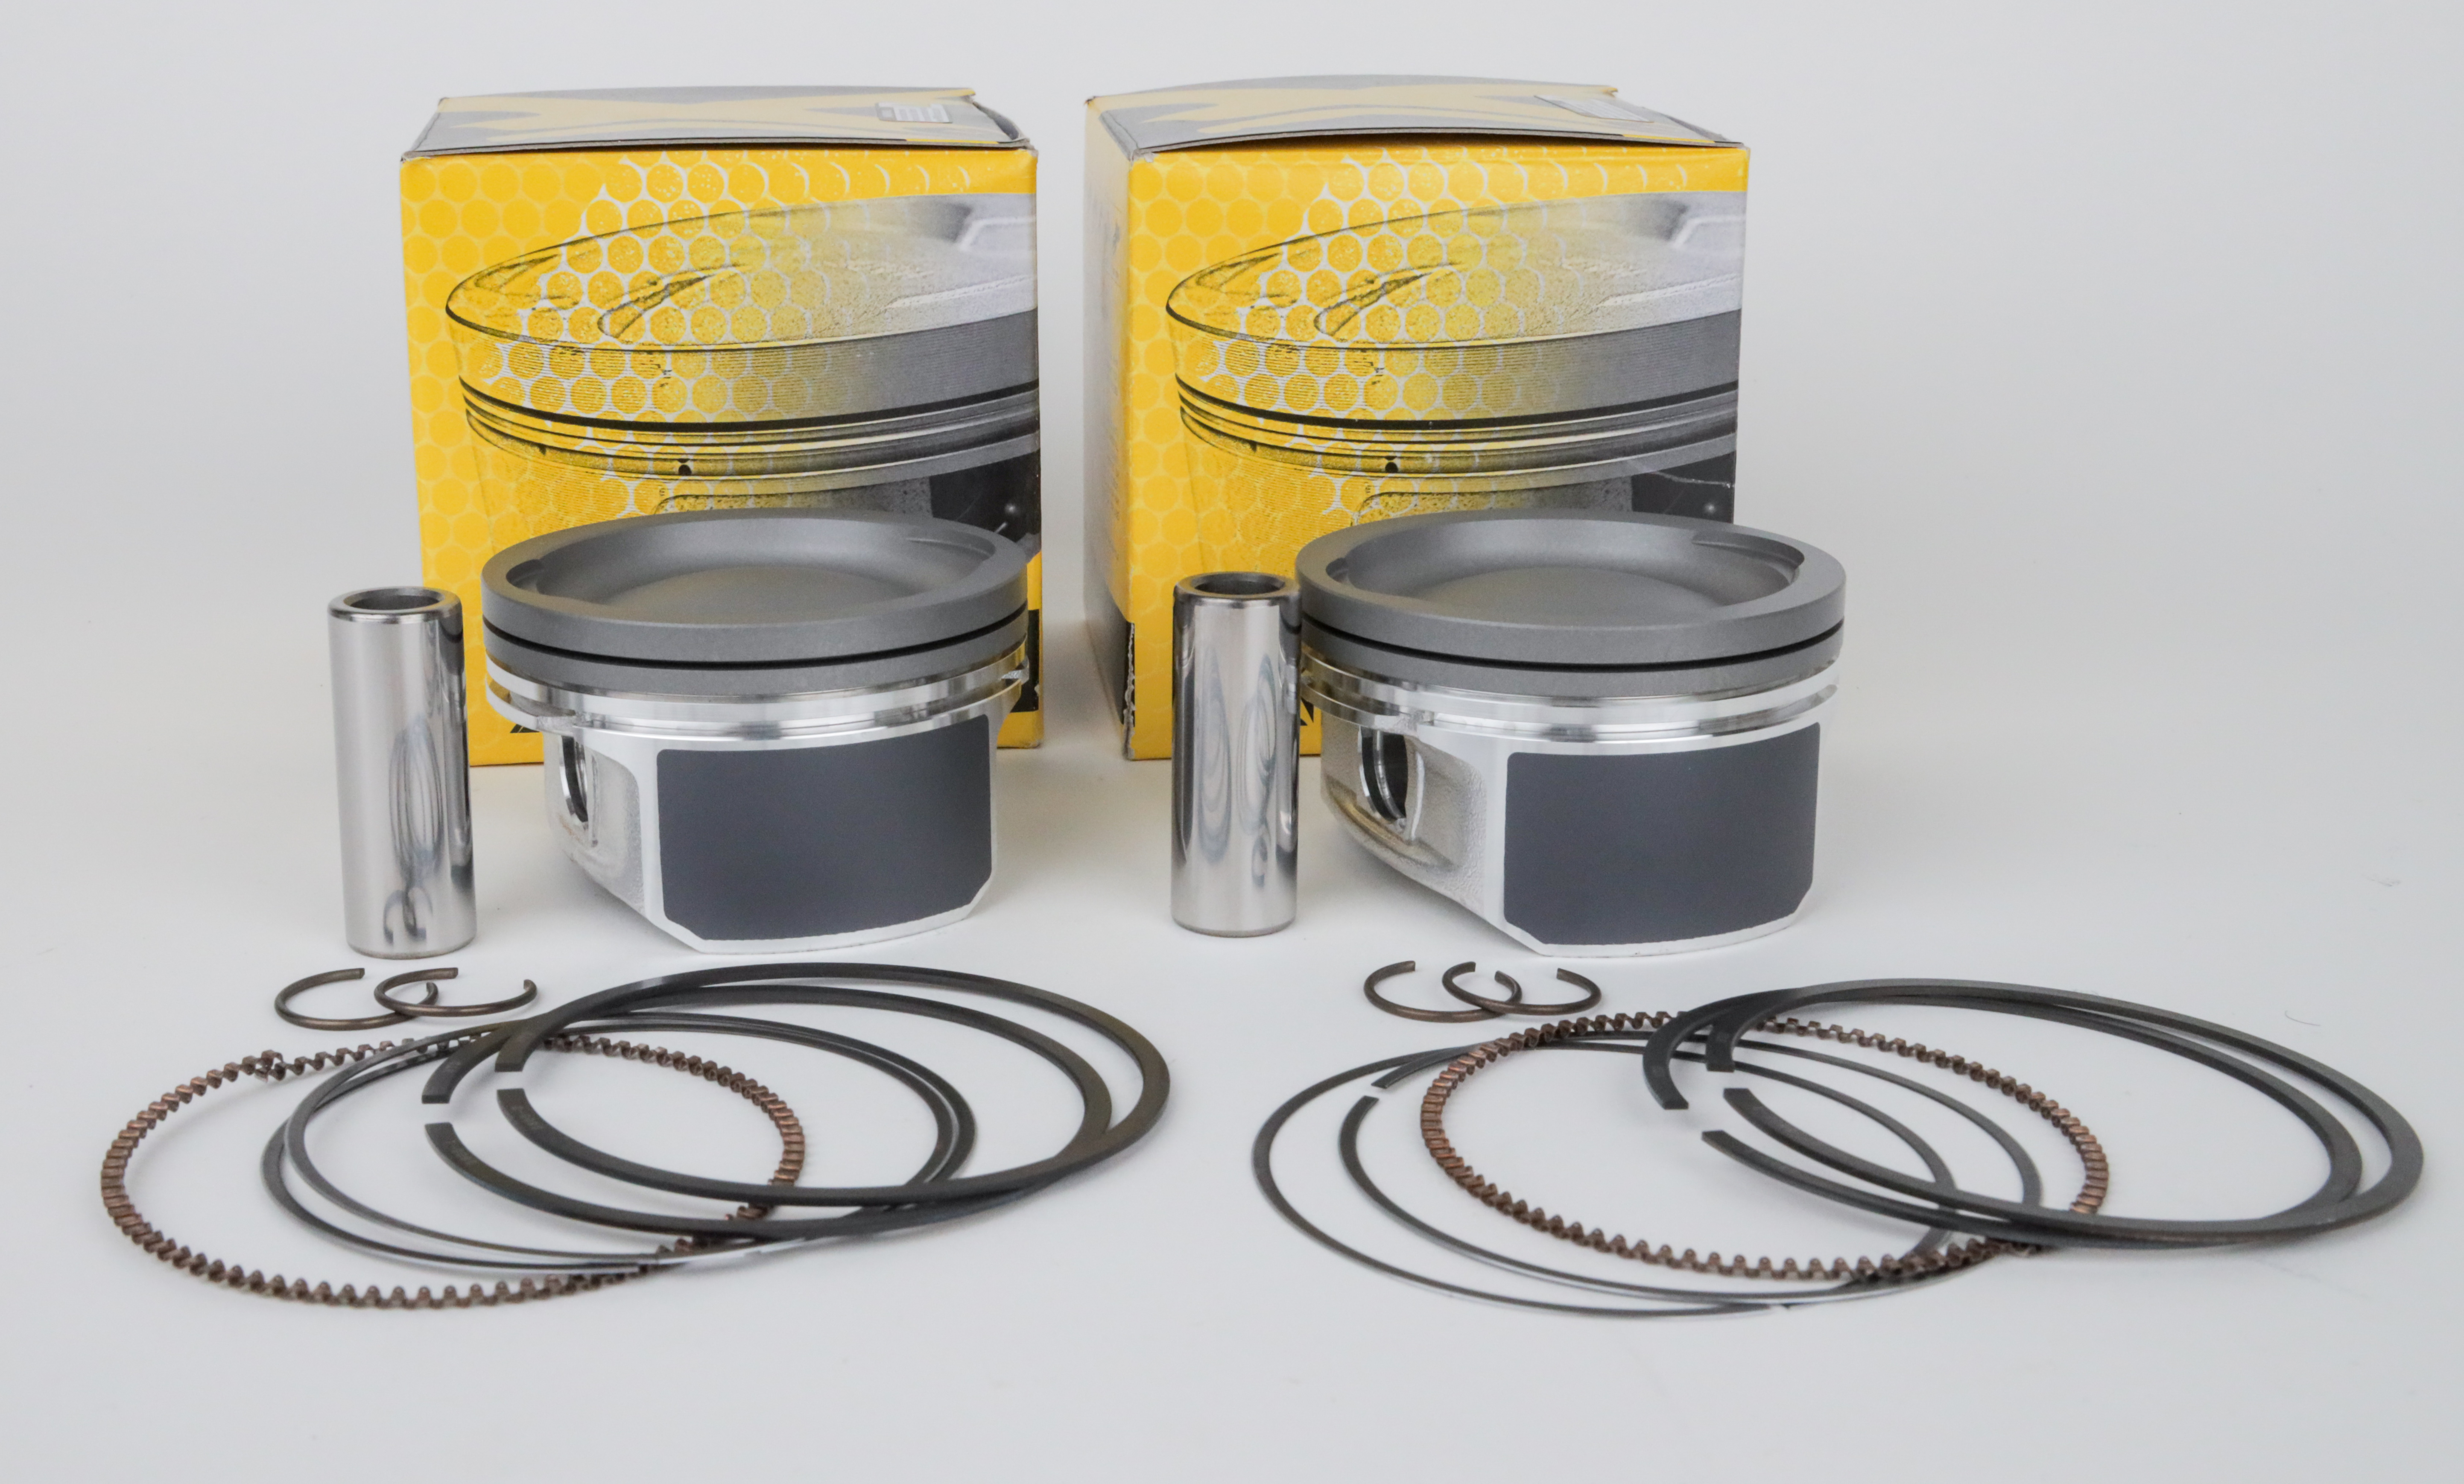 ProX Pistons Provide Affordable Performance for Polaris RZR 800 Engines